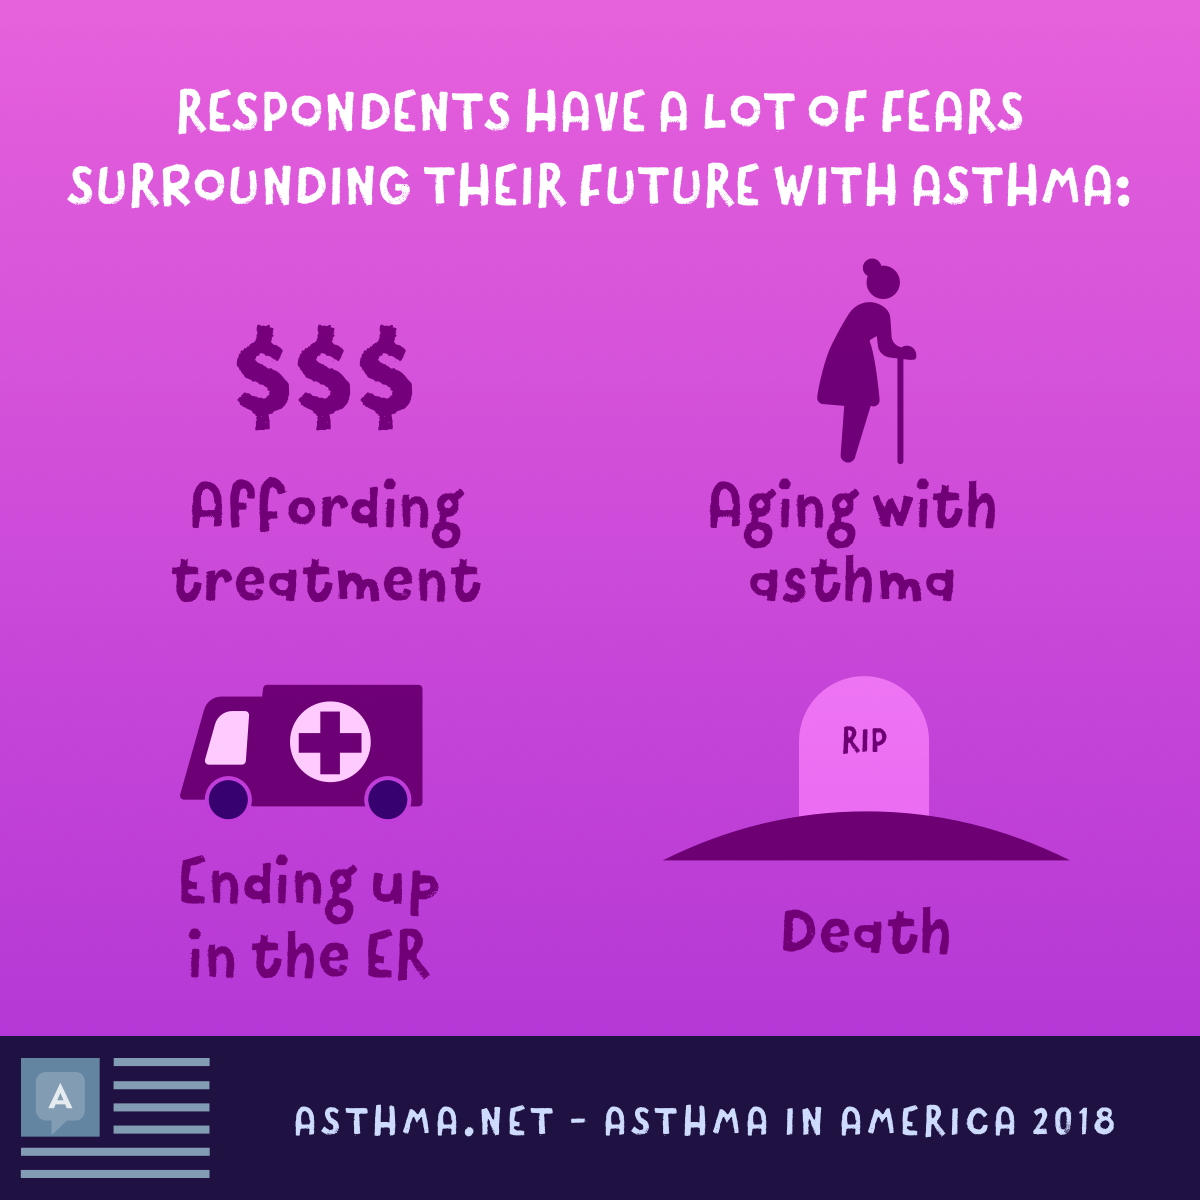 A life with asthma is not without the fears like cost of management, hospitalization, etc.